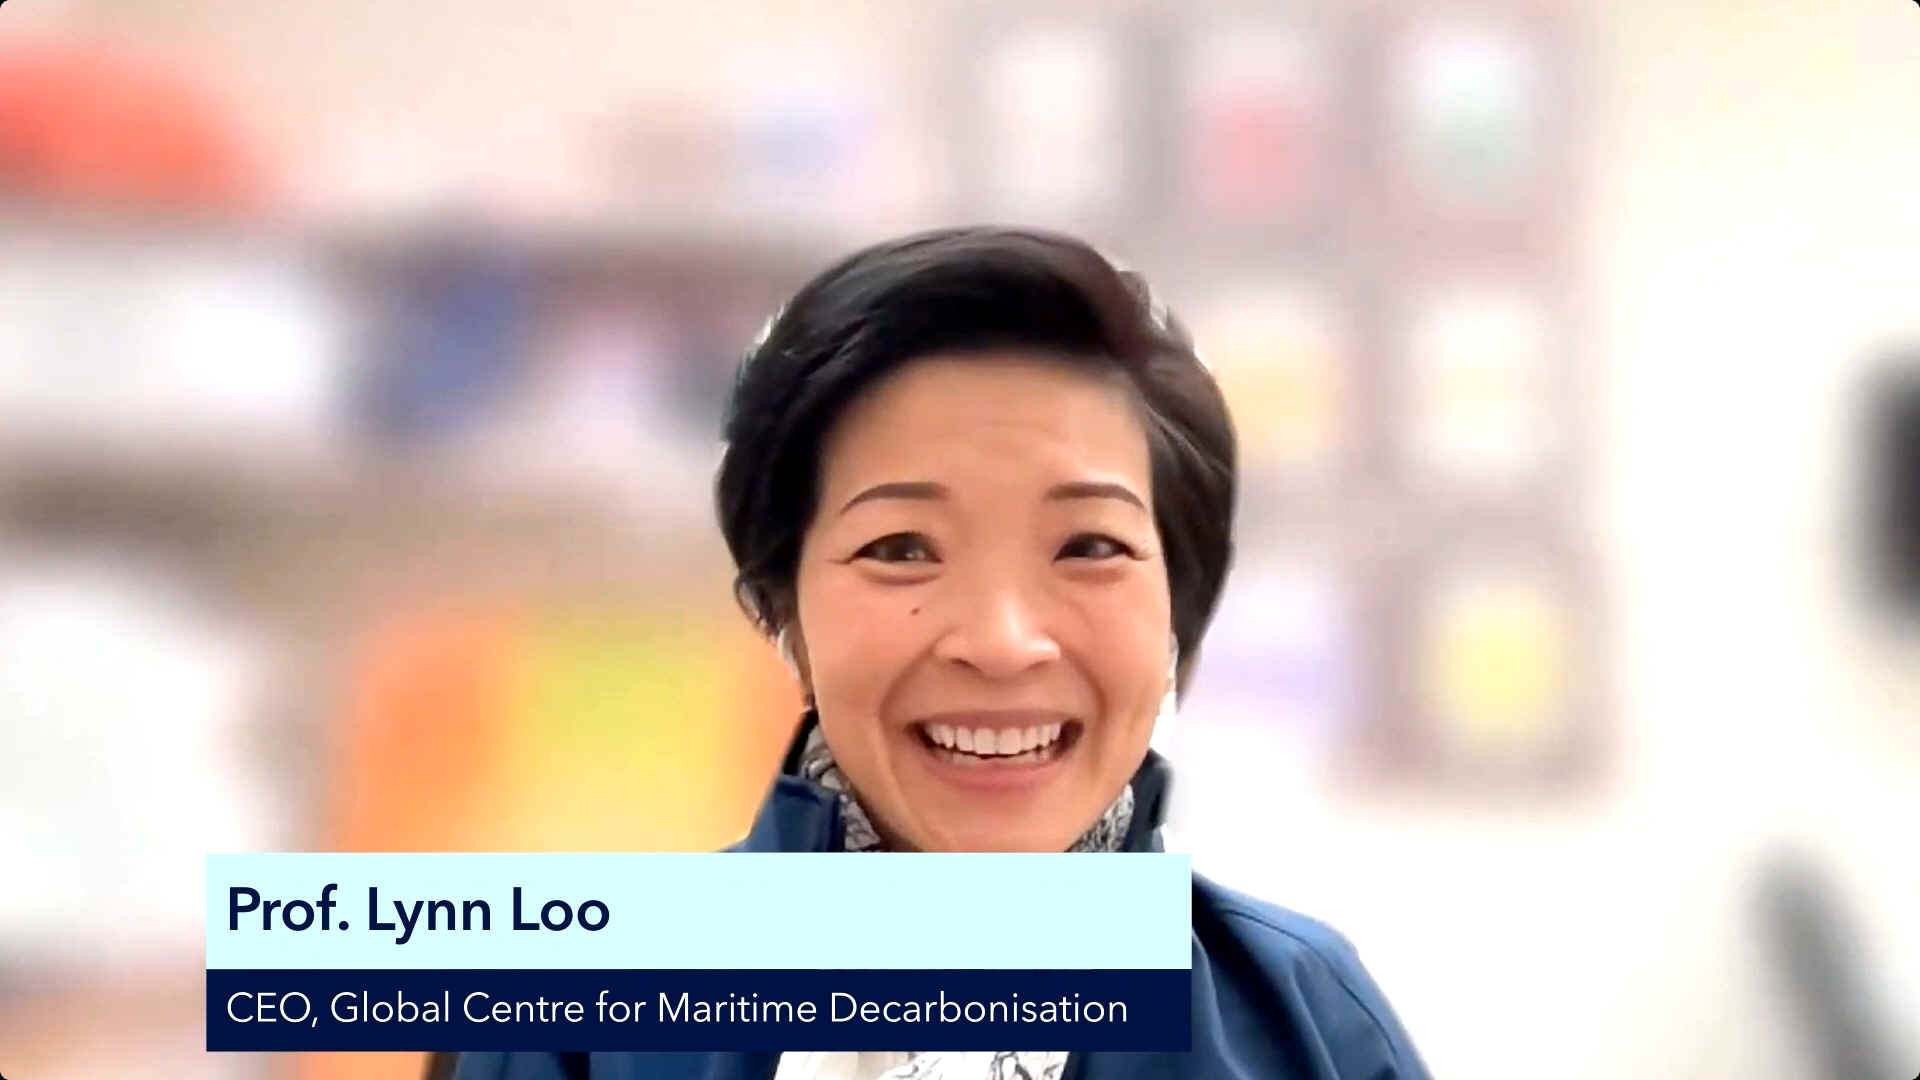 Prof. Lynn Loo - CEO, Global Centre for Maritime Decarbonisation